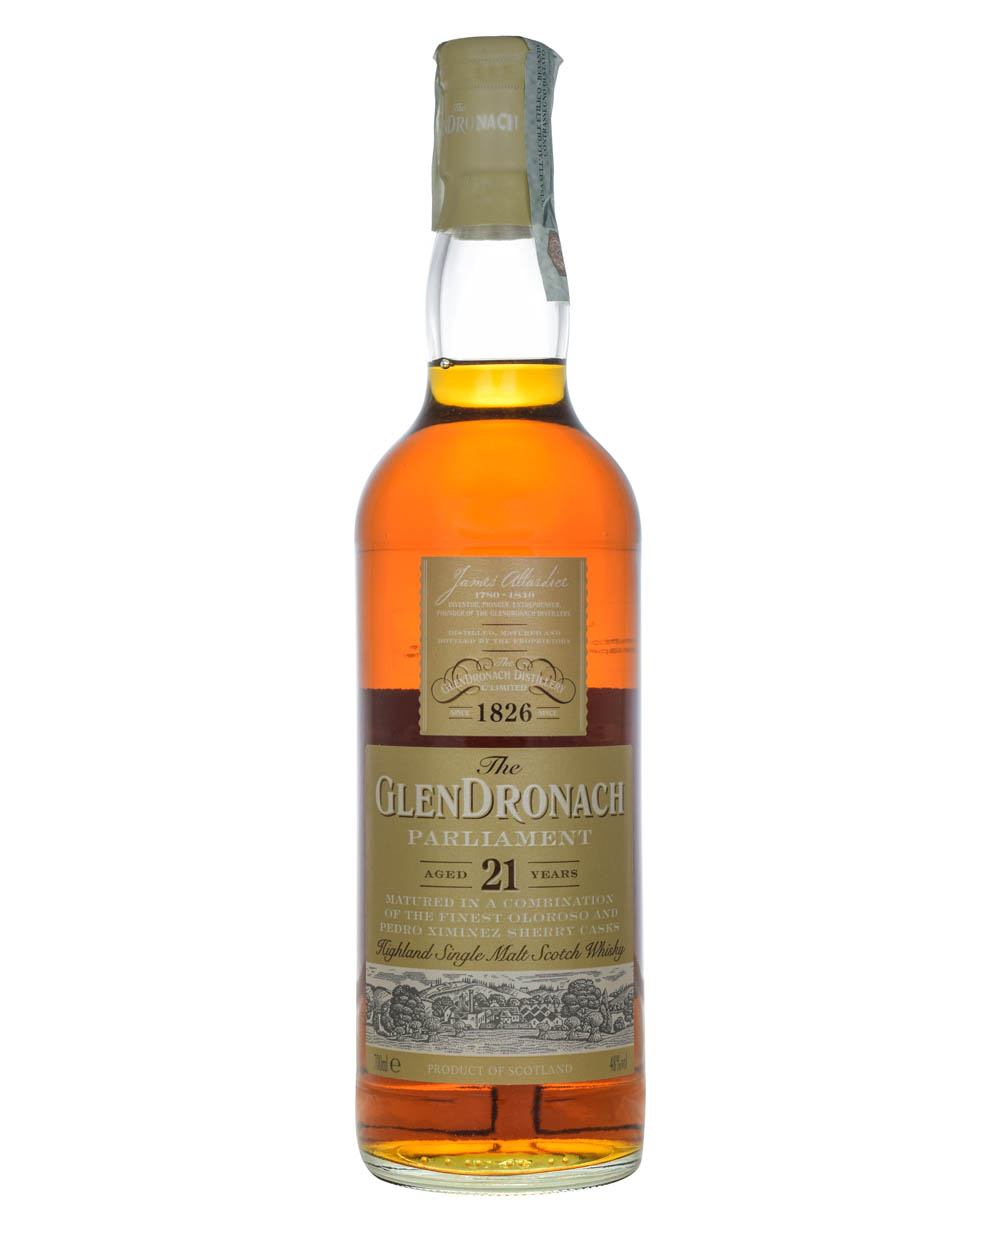 Glendronach Parliament 21 Years Old Musthave Malts MHM